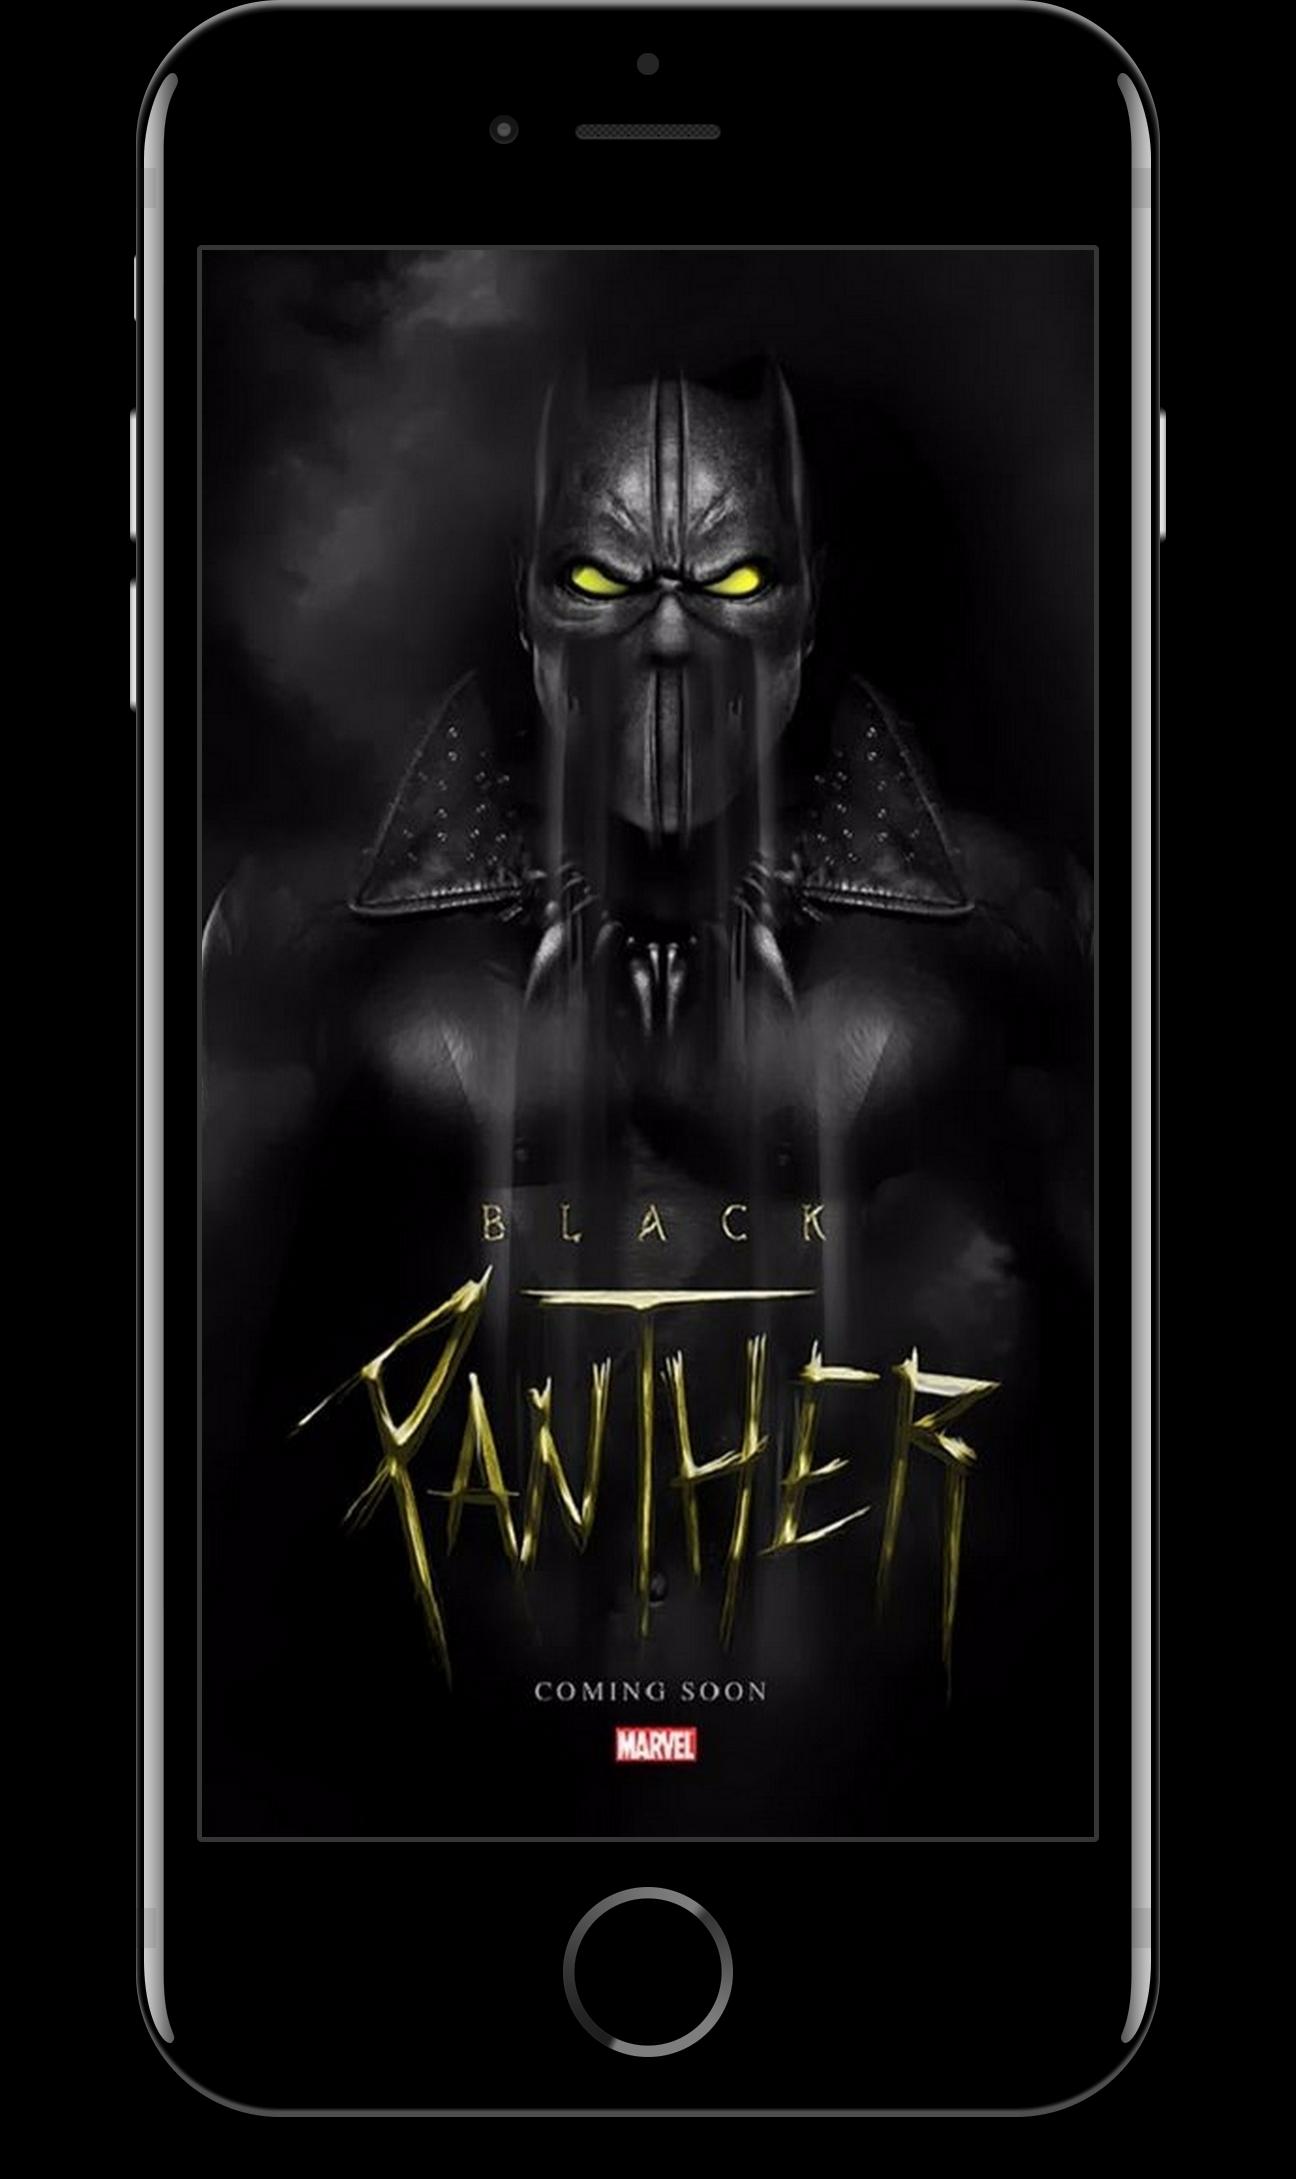 Black Panther Wallpapers 18 Hd For Android Apk Download